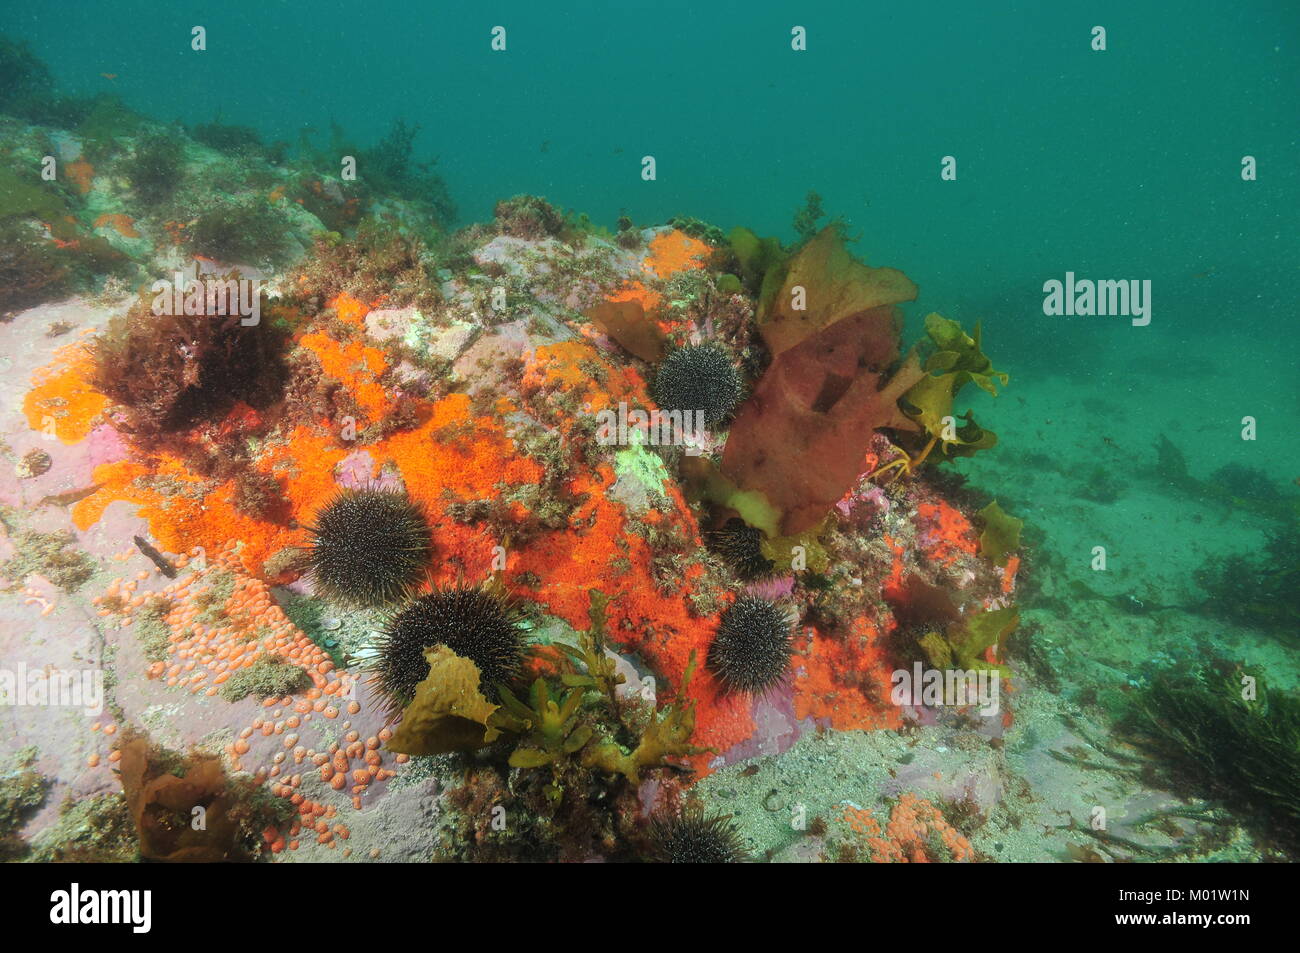 Rock on sandy sea bottom covered with colorful encrusting sponges and tunicates and crawling sea urchins Evechinus chloroticus. Stock Photo